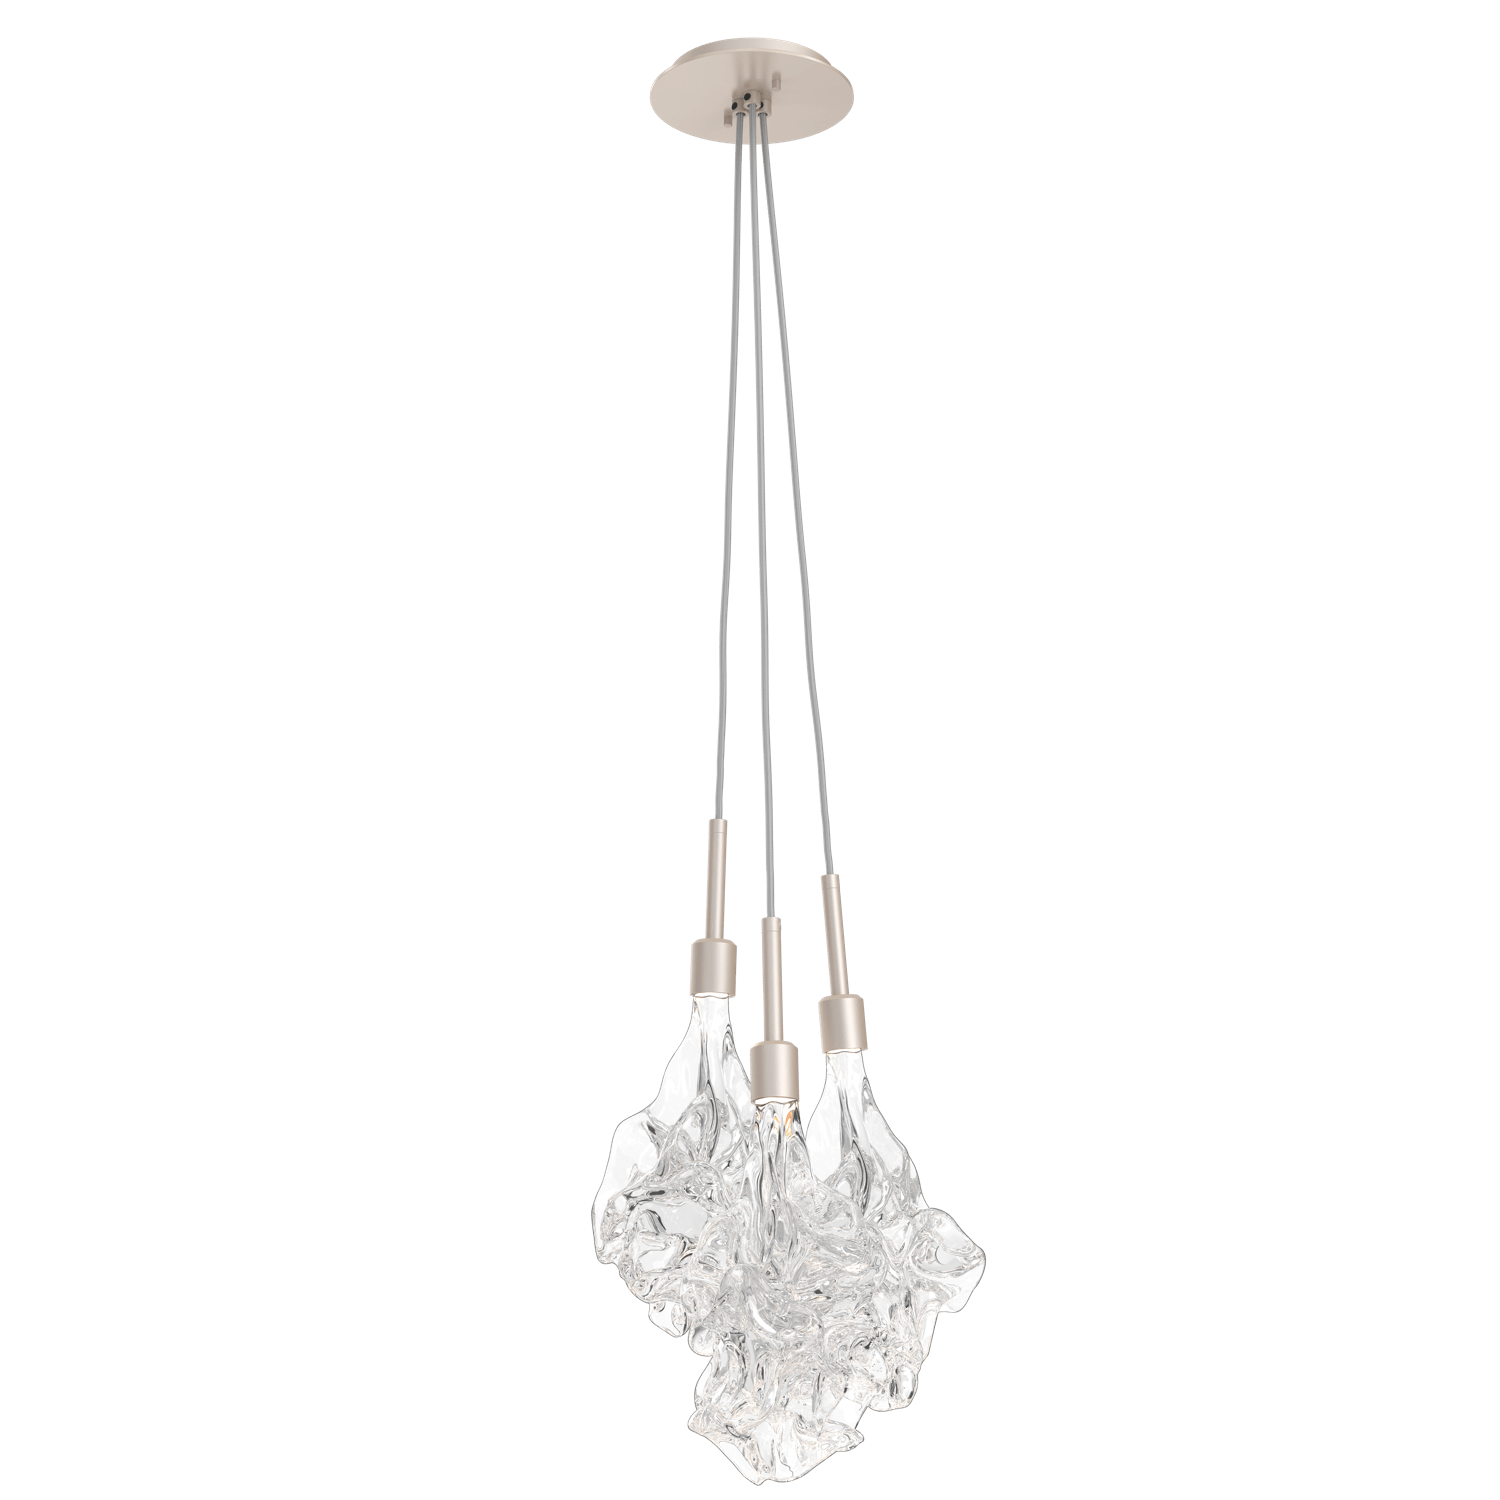 LAB0059-0A-BS-Hammerton-Studio-Blossom-3-light-cluster-pendant-light-with-metallic-beige-silver-finish-and-clear-handblown-crystal-glass-shades-and-LED-lamping